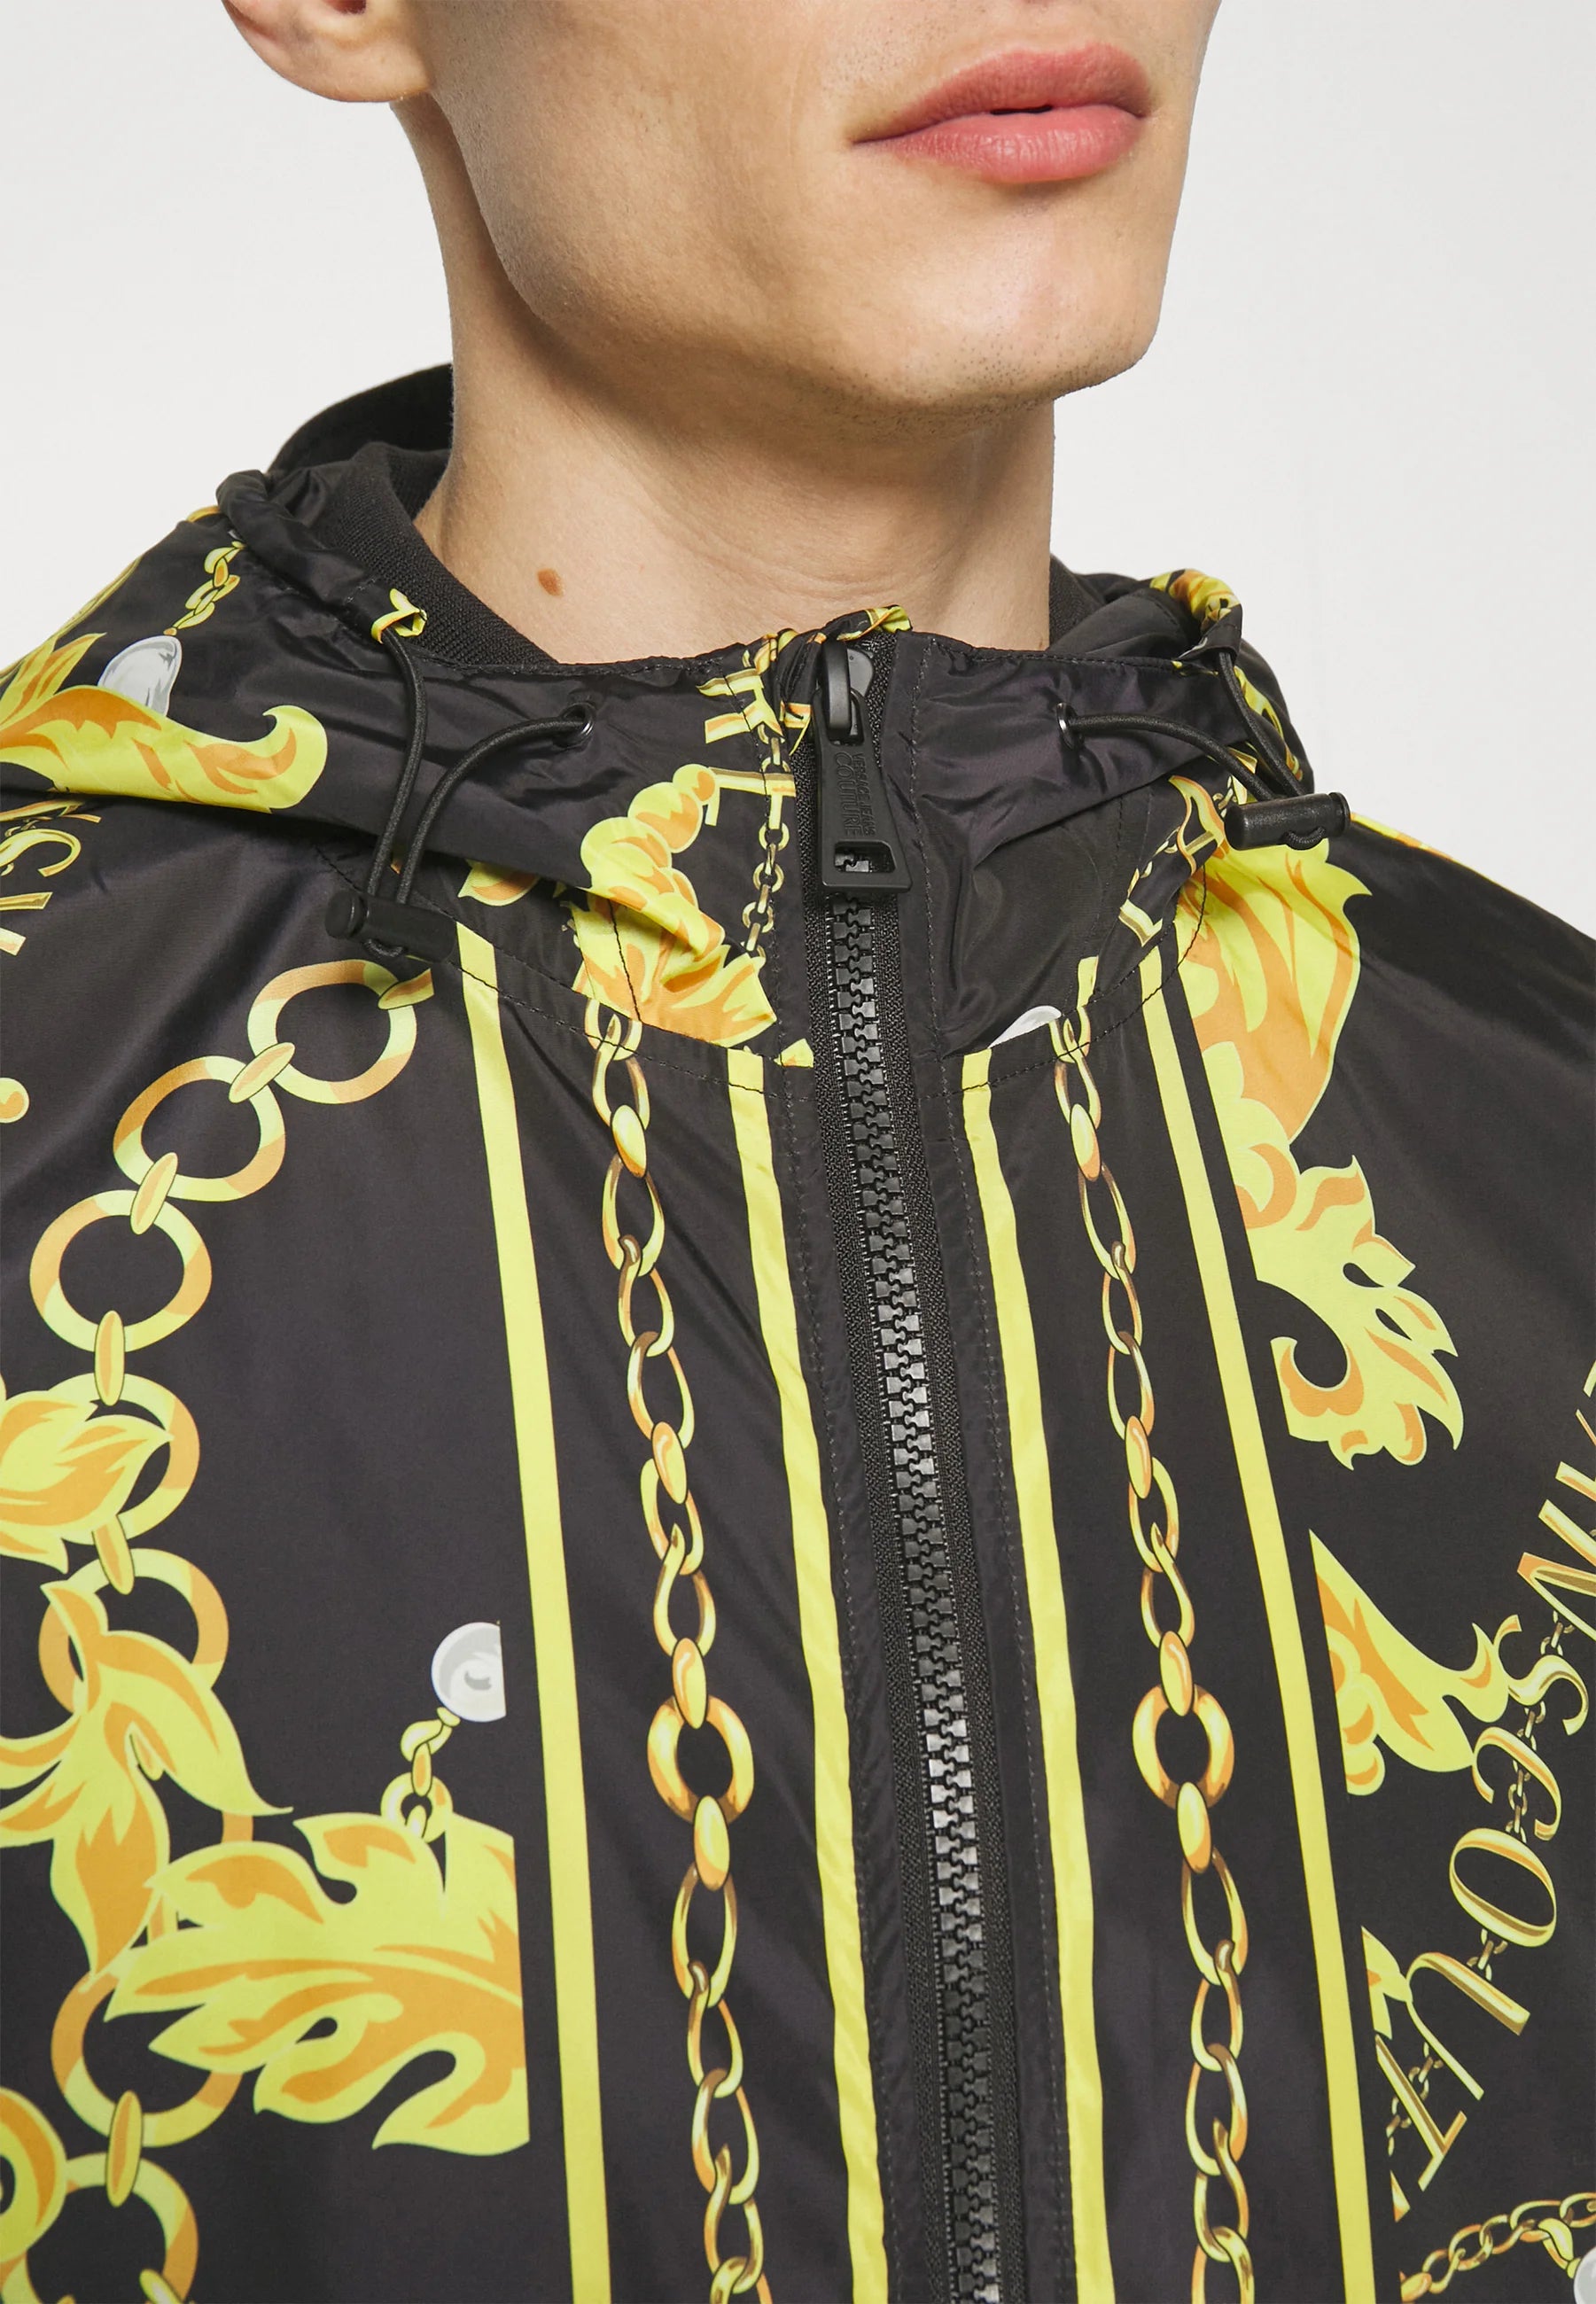 Versace Jeans Couture Chain Baroque Jacket